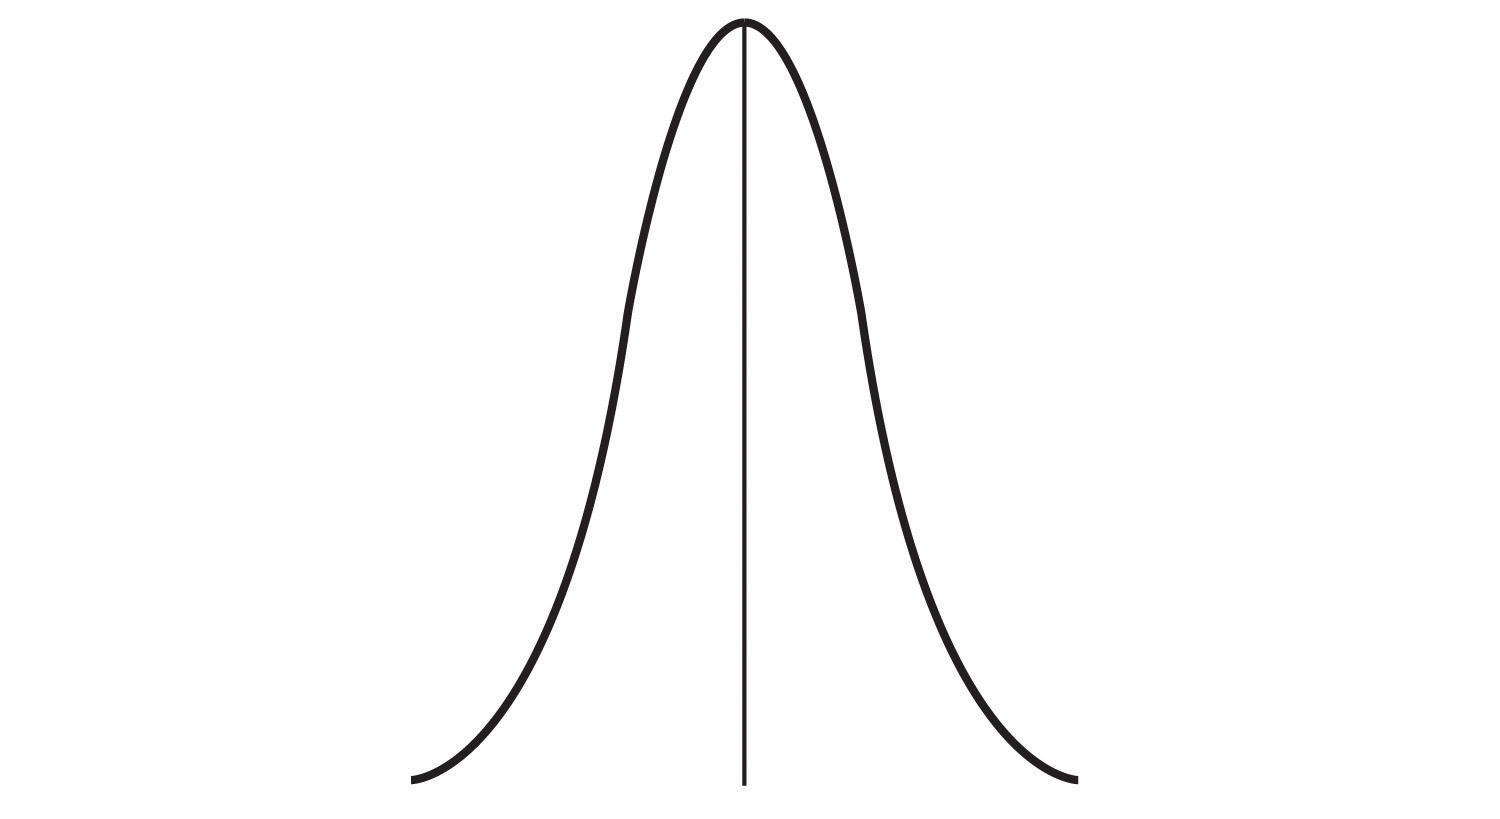 This line graph forms a narrow bell shape around the central tendency.